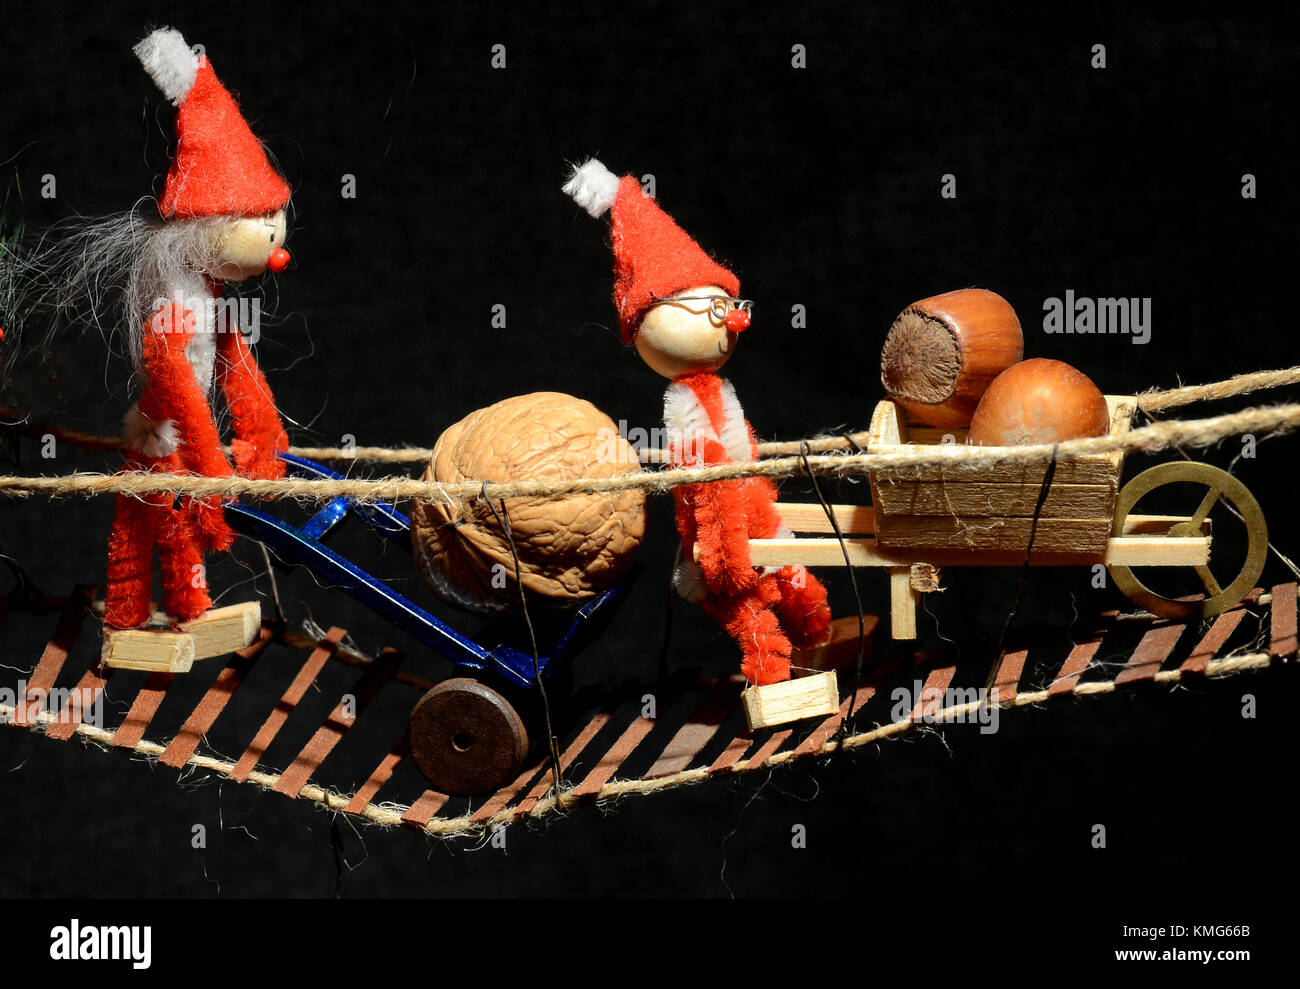 Pixie gang vrosses a wobbly bridge wih look carried odn dollies and wheelbar. Stock Photo